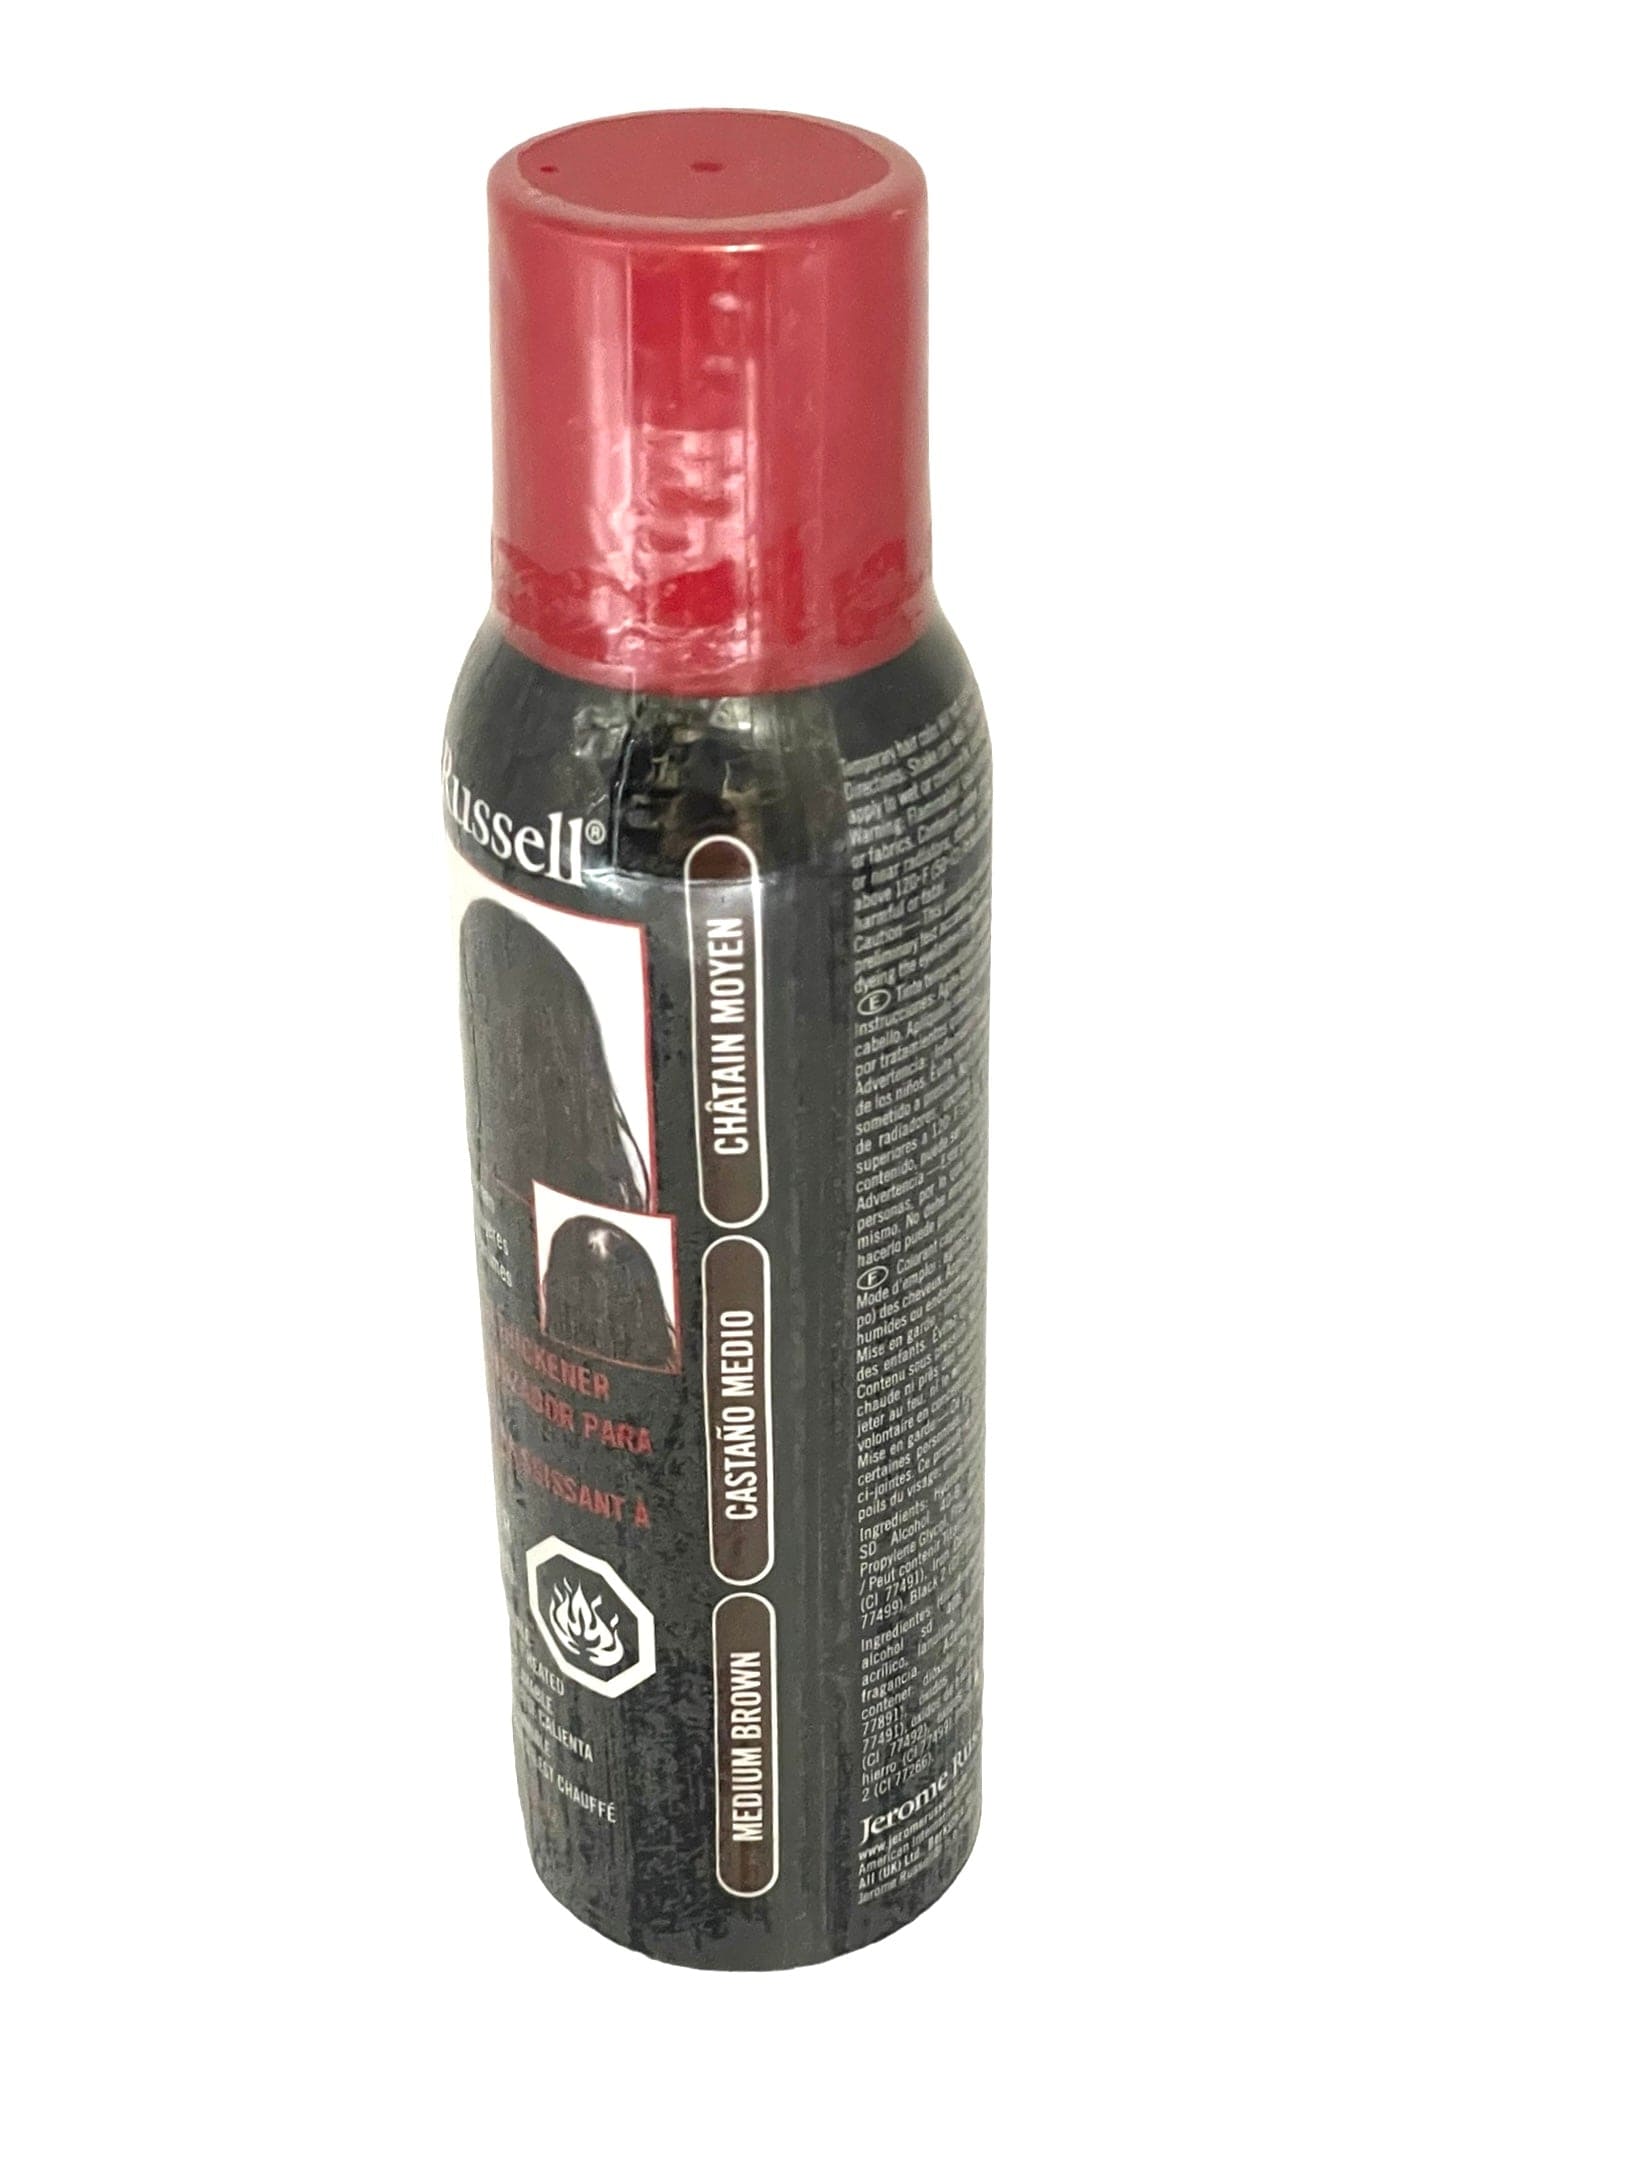 Root Touch Up Jerome Russell Spray & Hair Thickener 3.5oz Hair Color